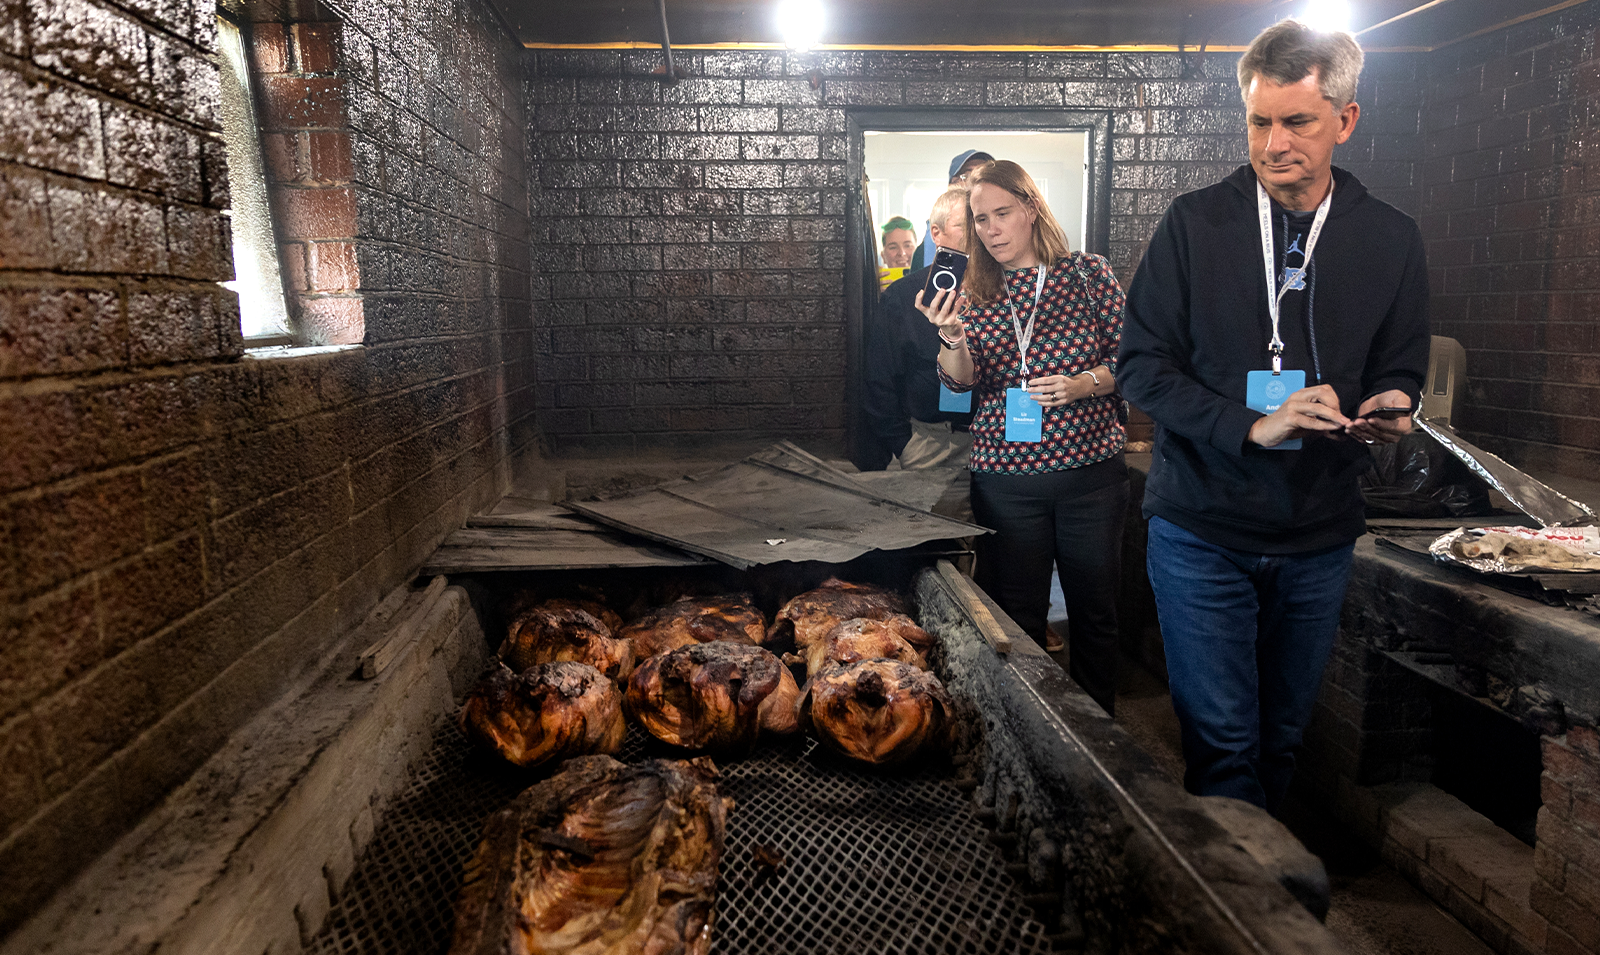 Tar Heel Bus Tour participants walk by hardwood coals in a barbecue reasaurant.